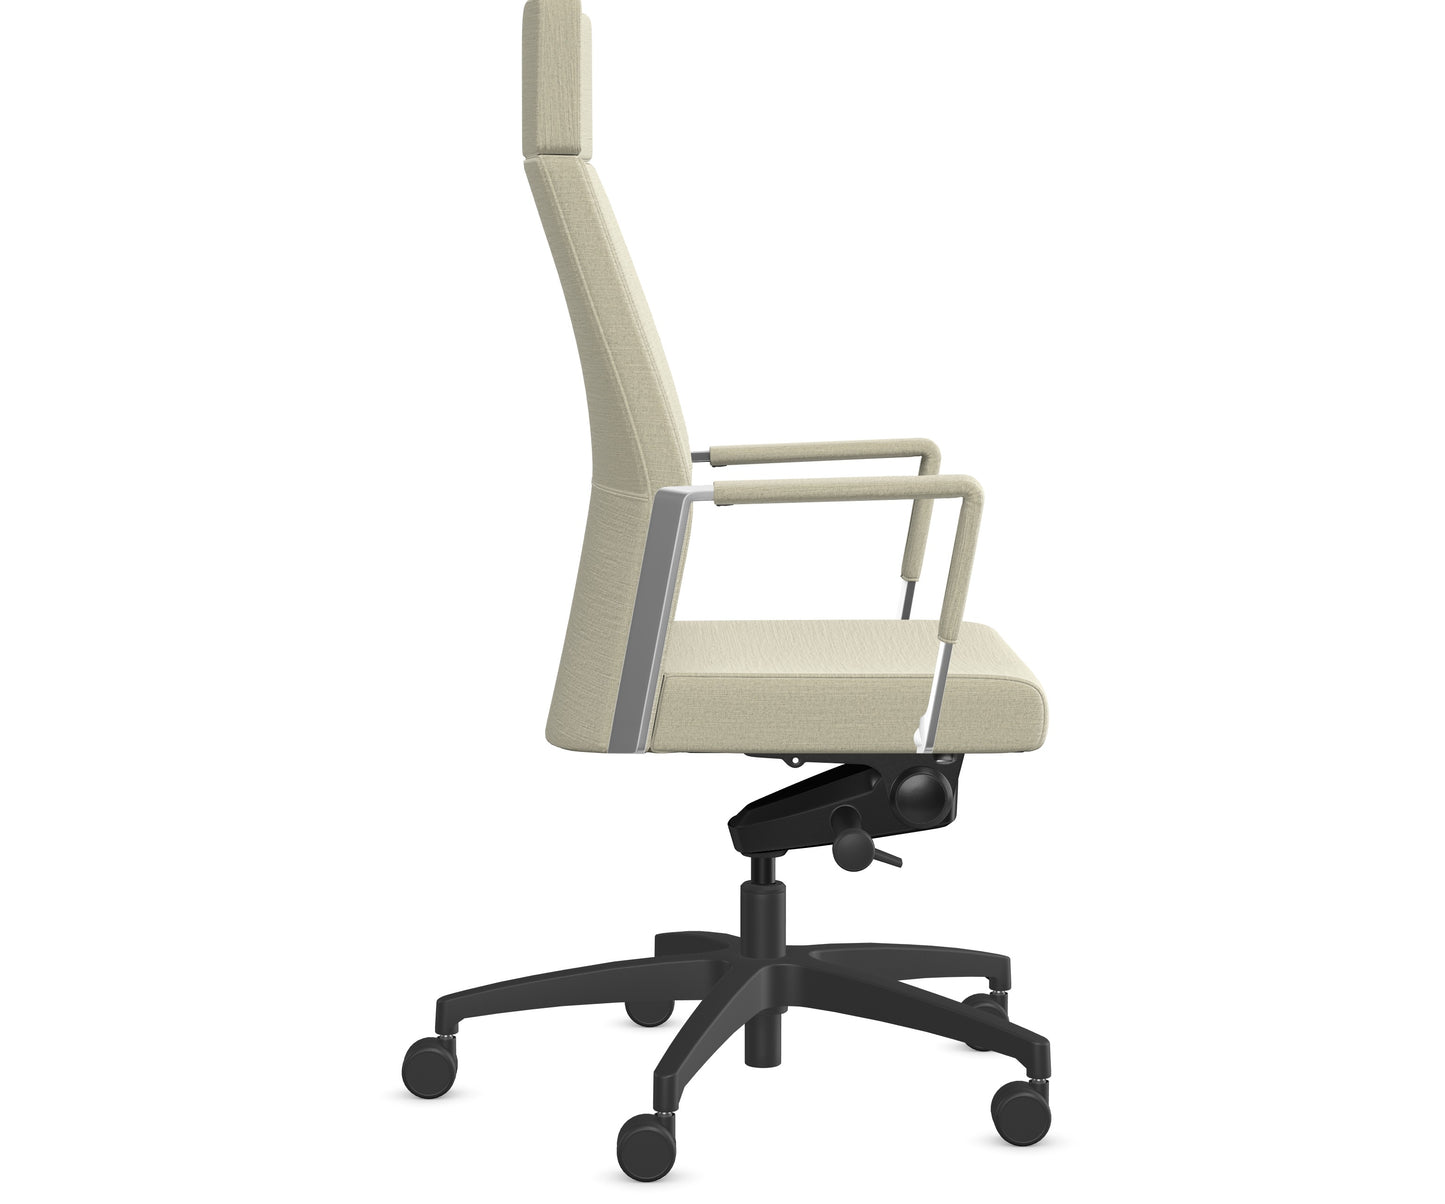 Requisite High-Back Office Chair